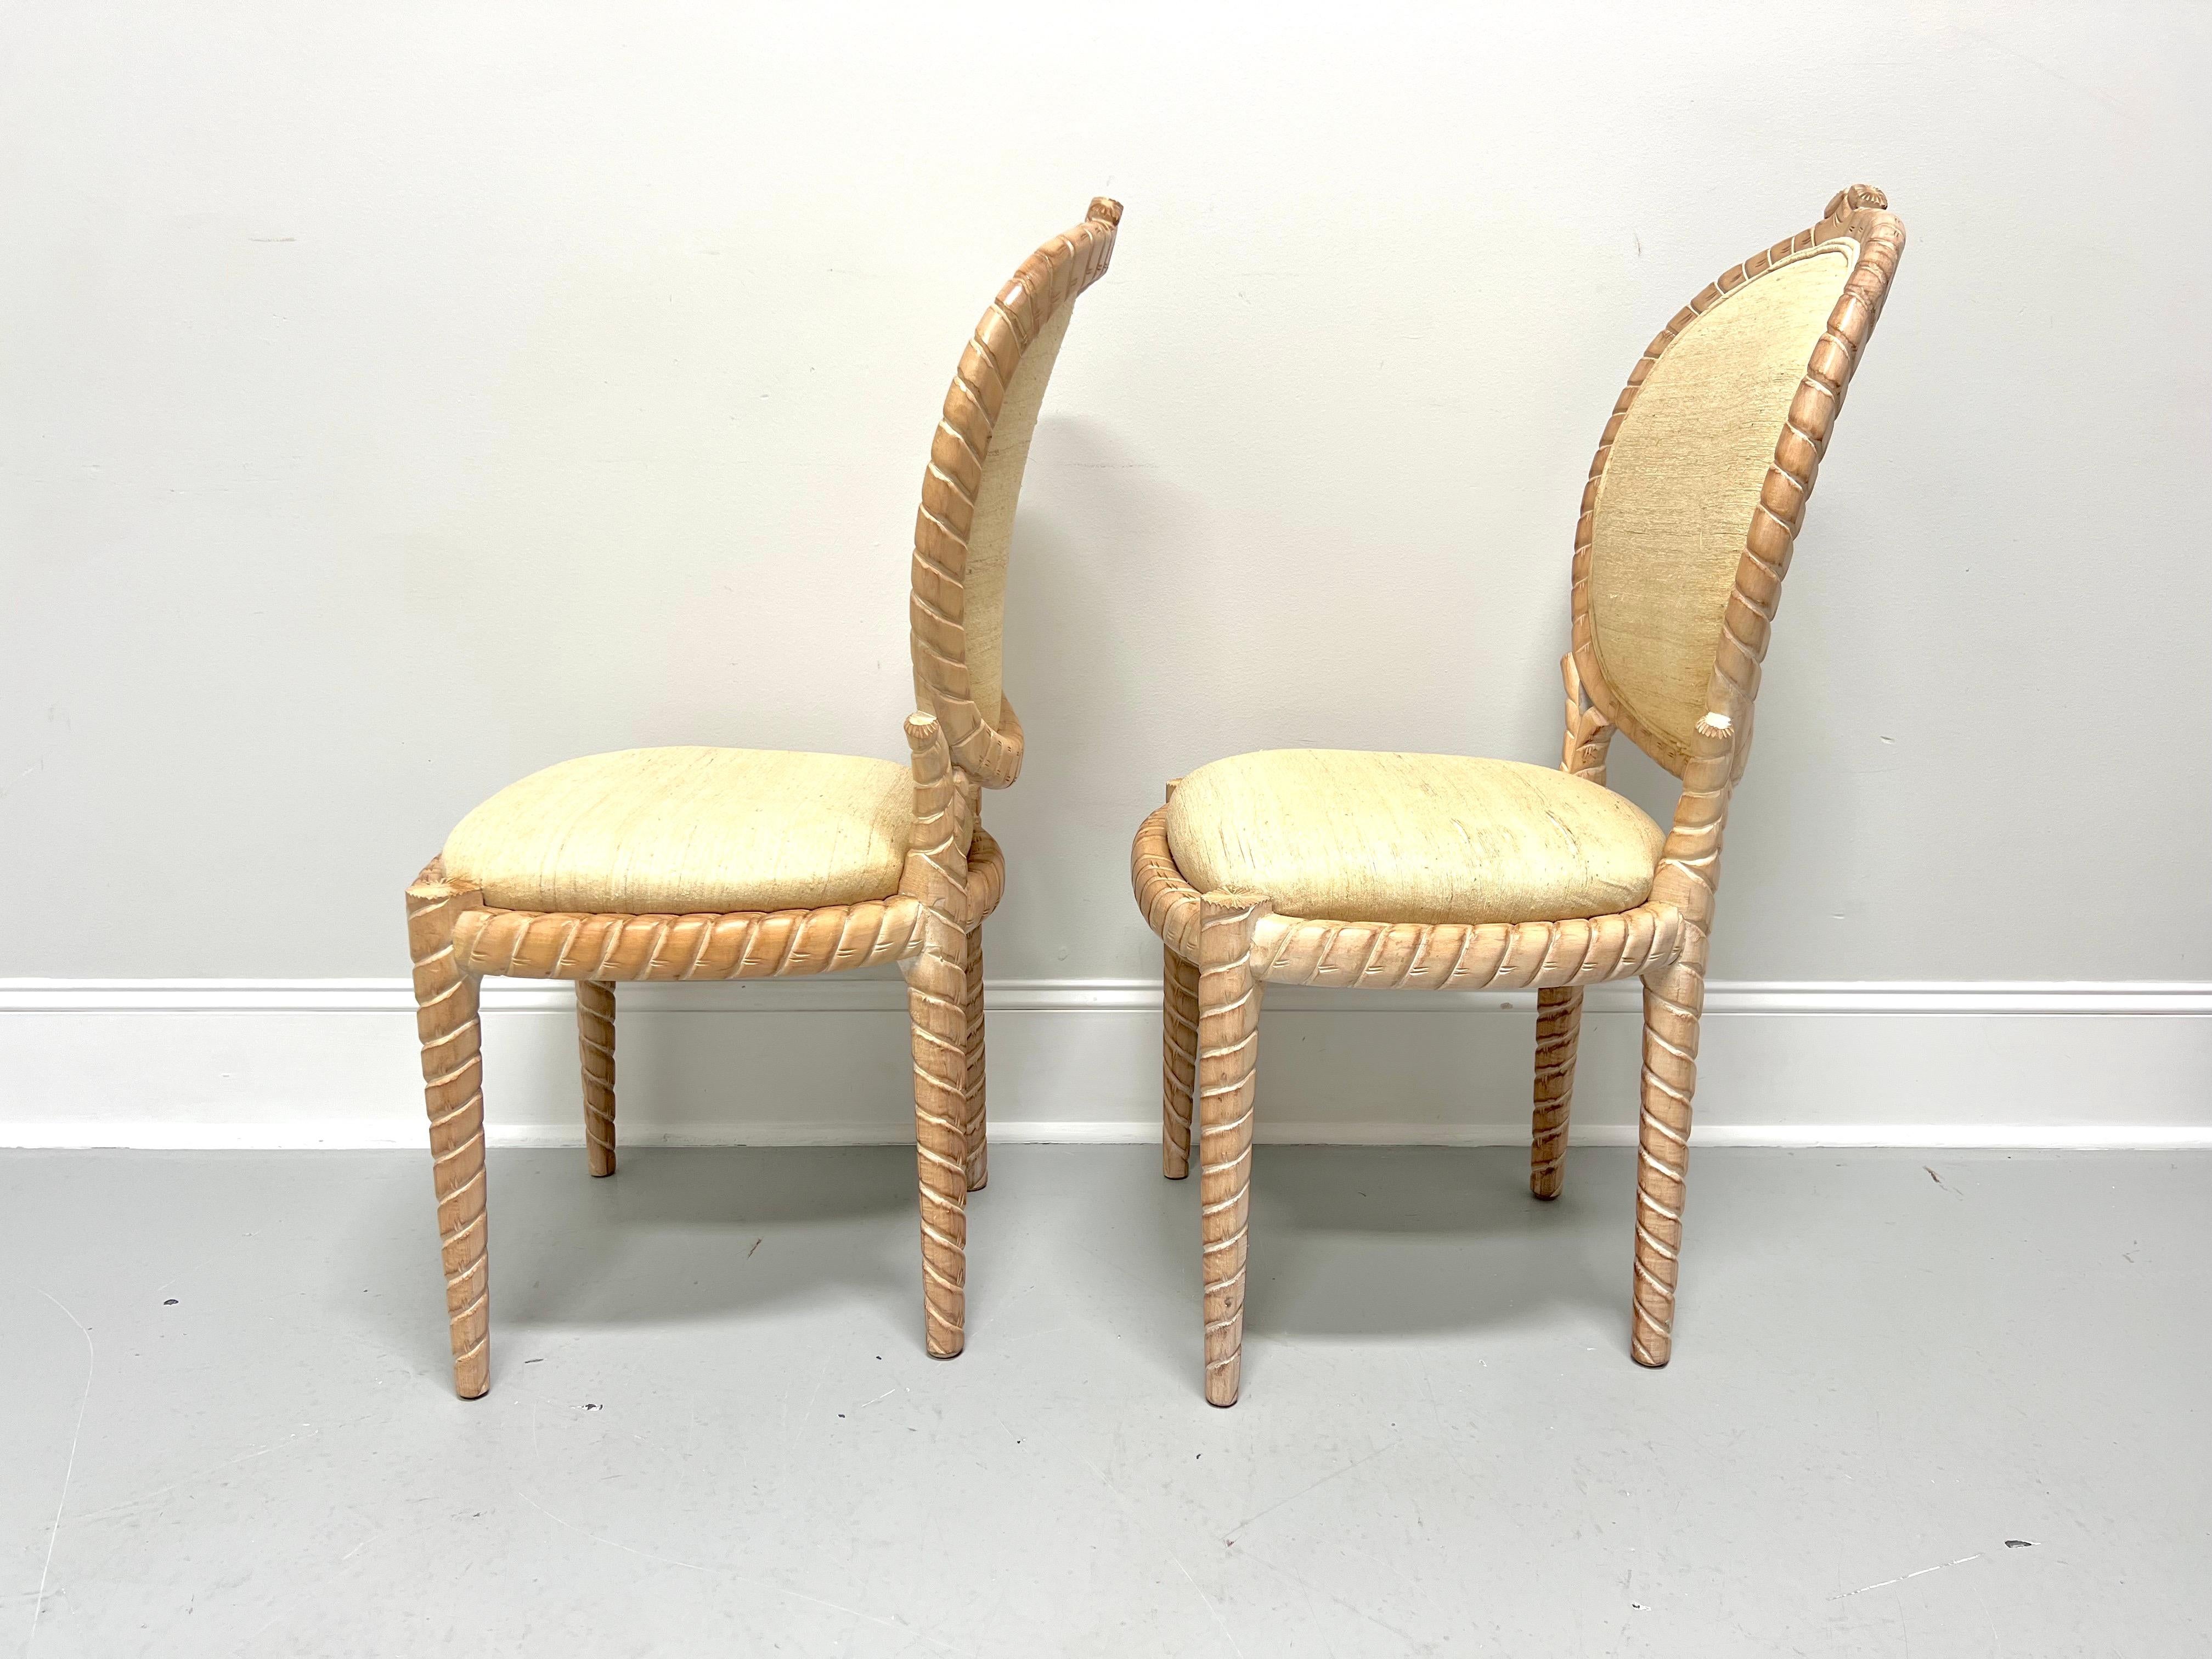 1980's Carved Whitewashed Wood Boho Rope Twist Dining Side Chairs - Pair A In Good Condition For Sale In Charlotte, NC